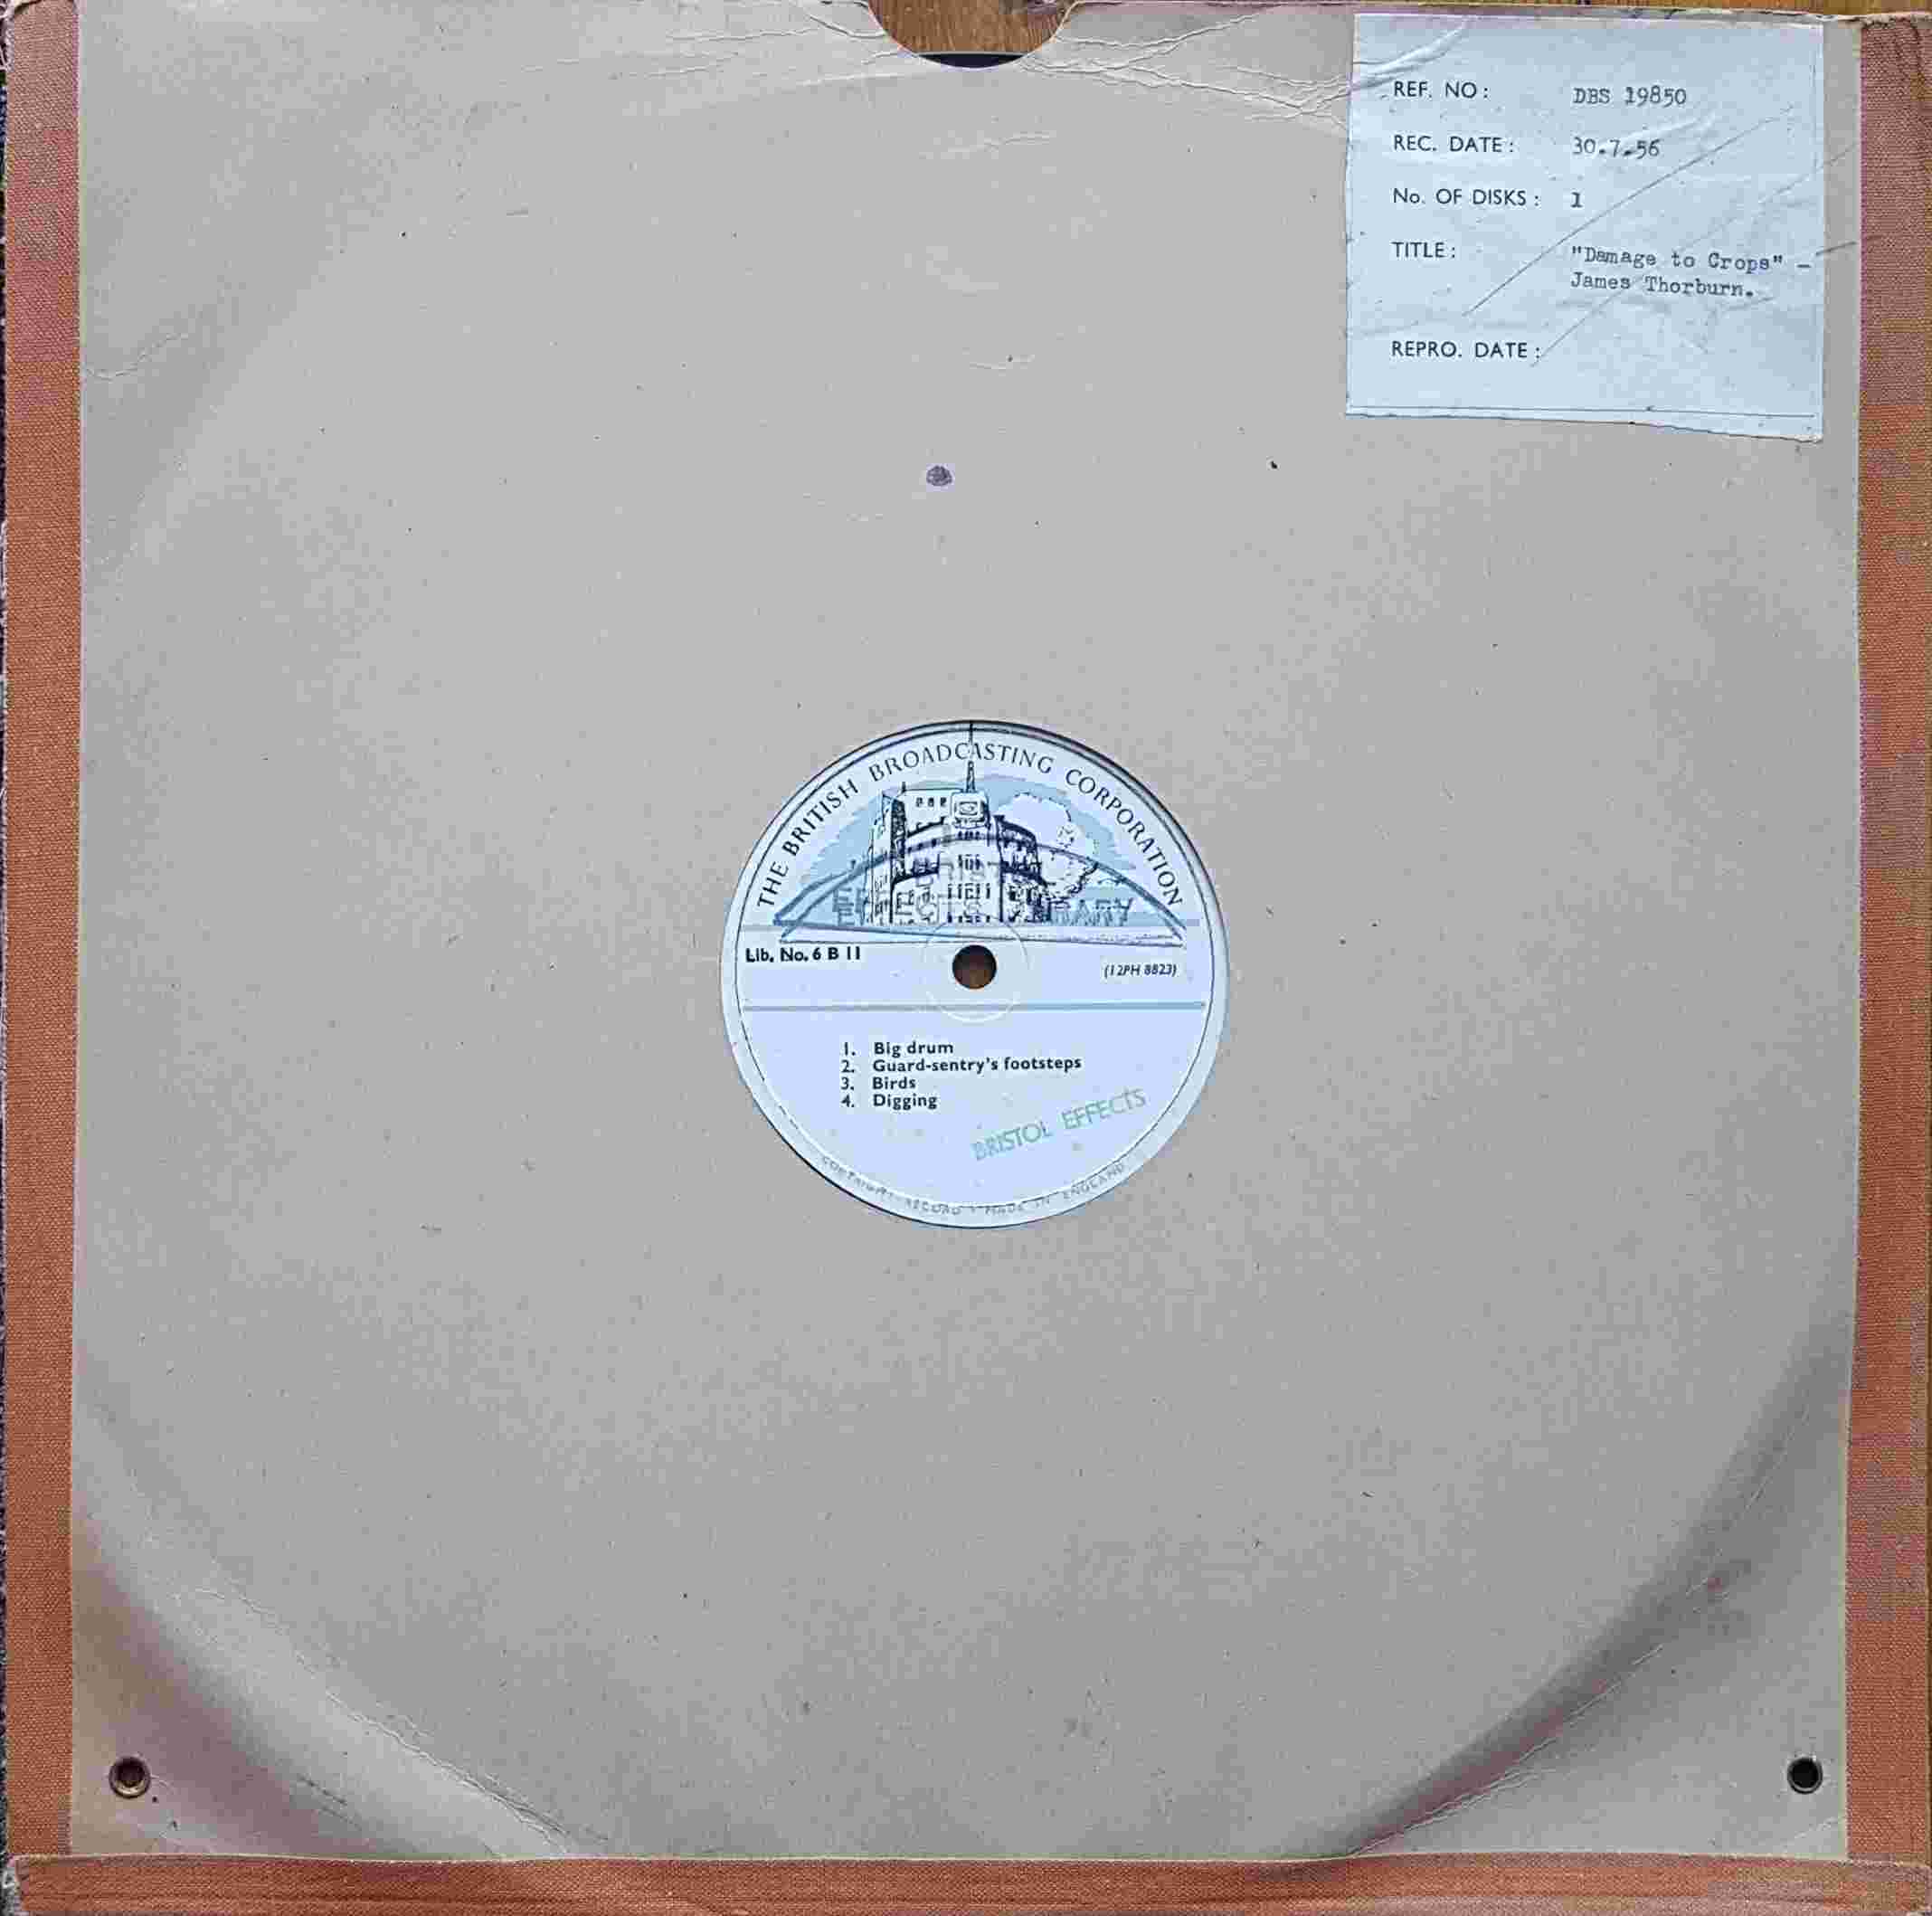 Picture of 6 B 11 Big drum by artist Not registered from the BBC records and Tapes library